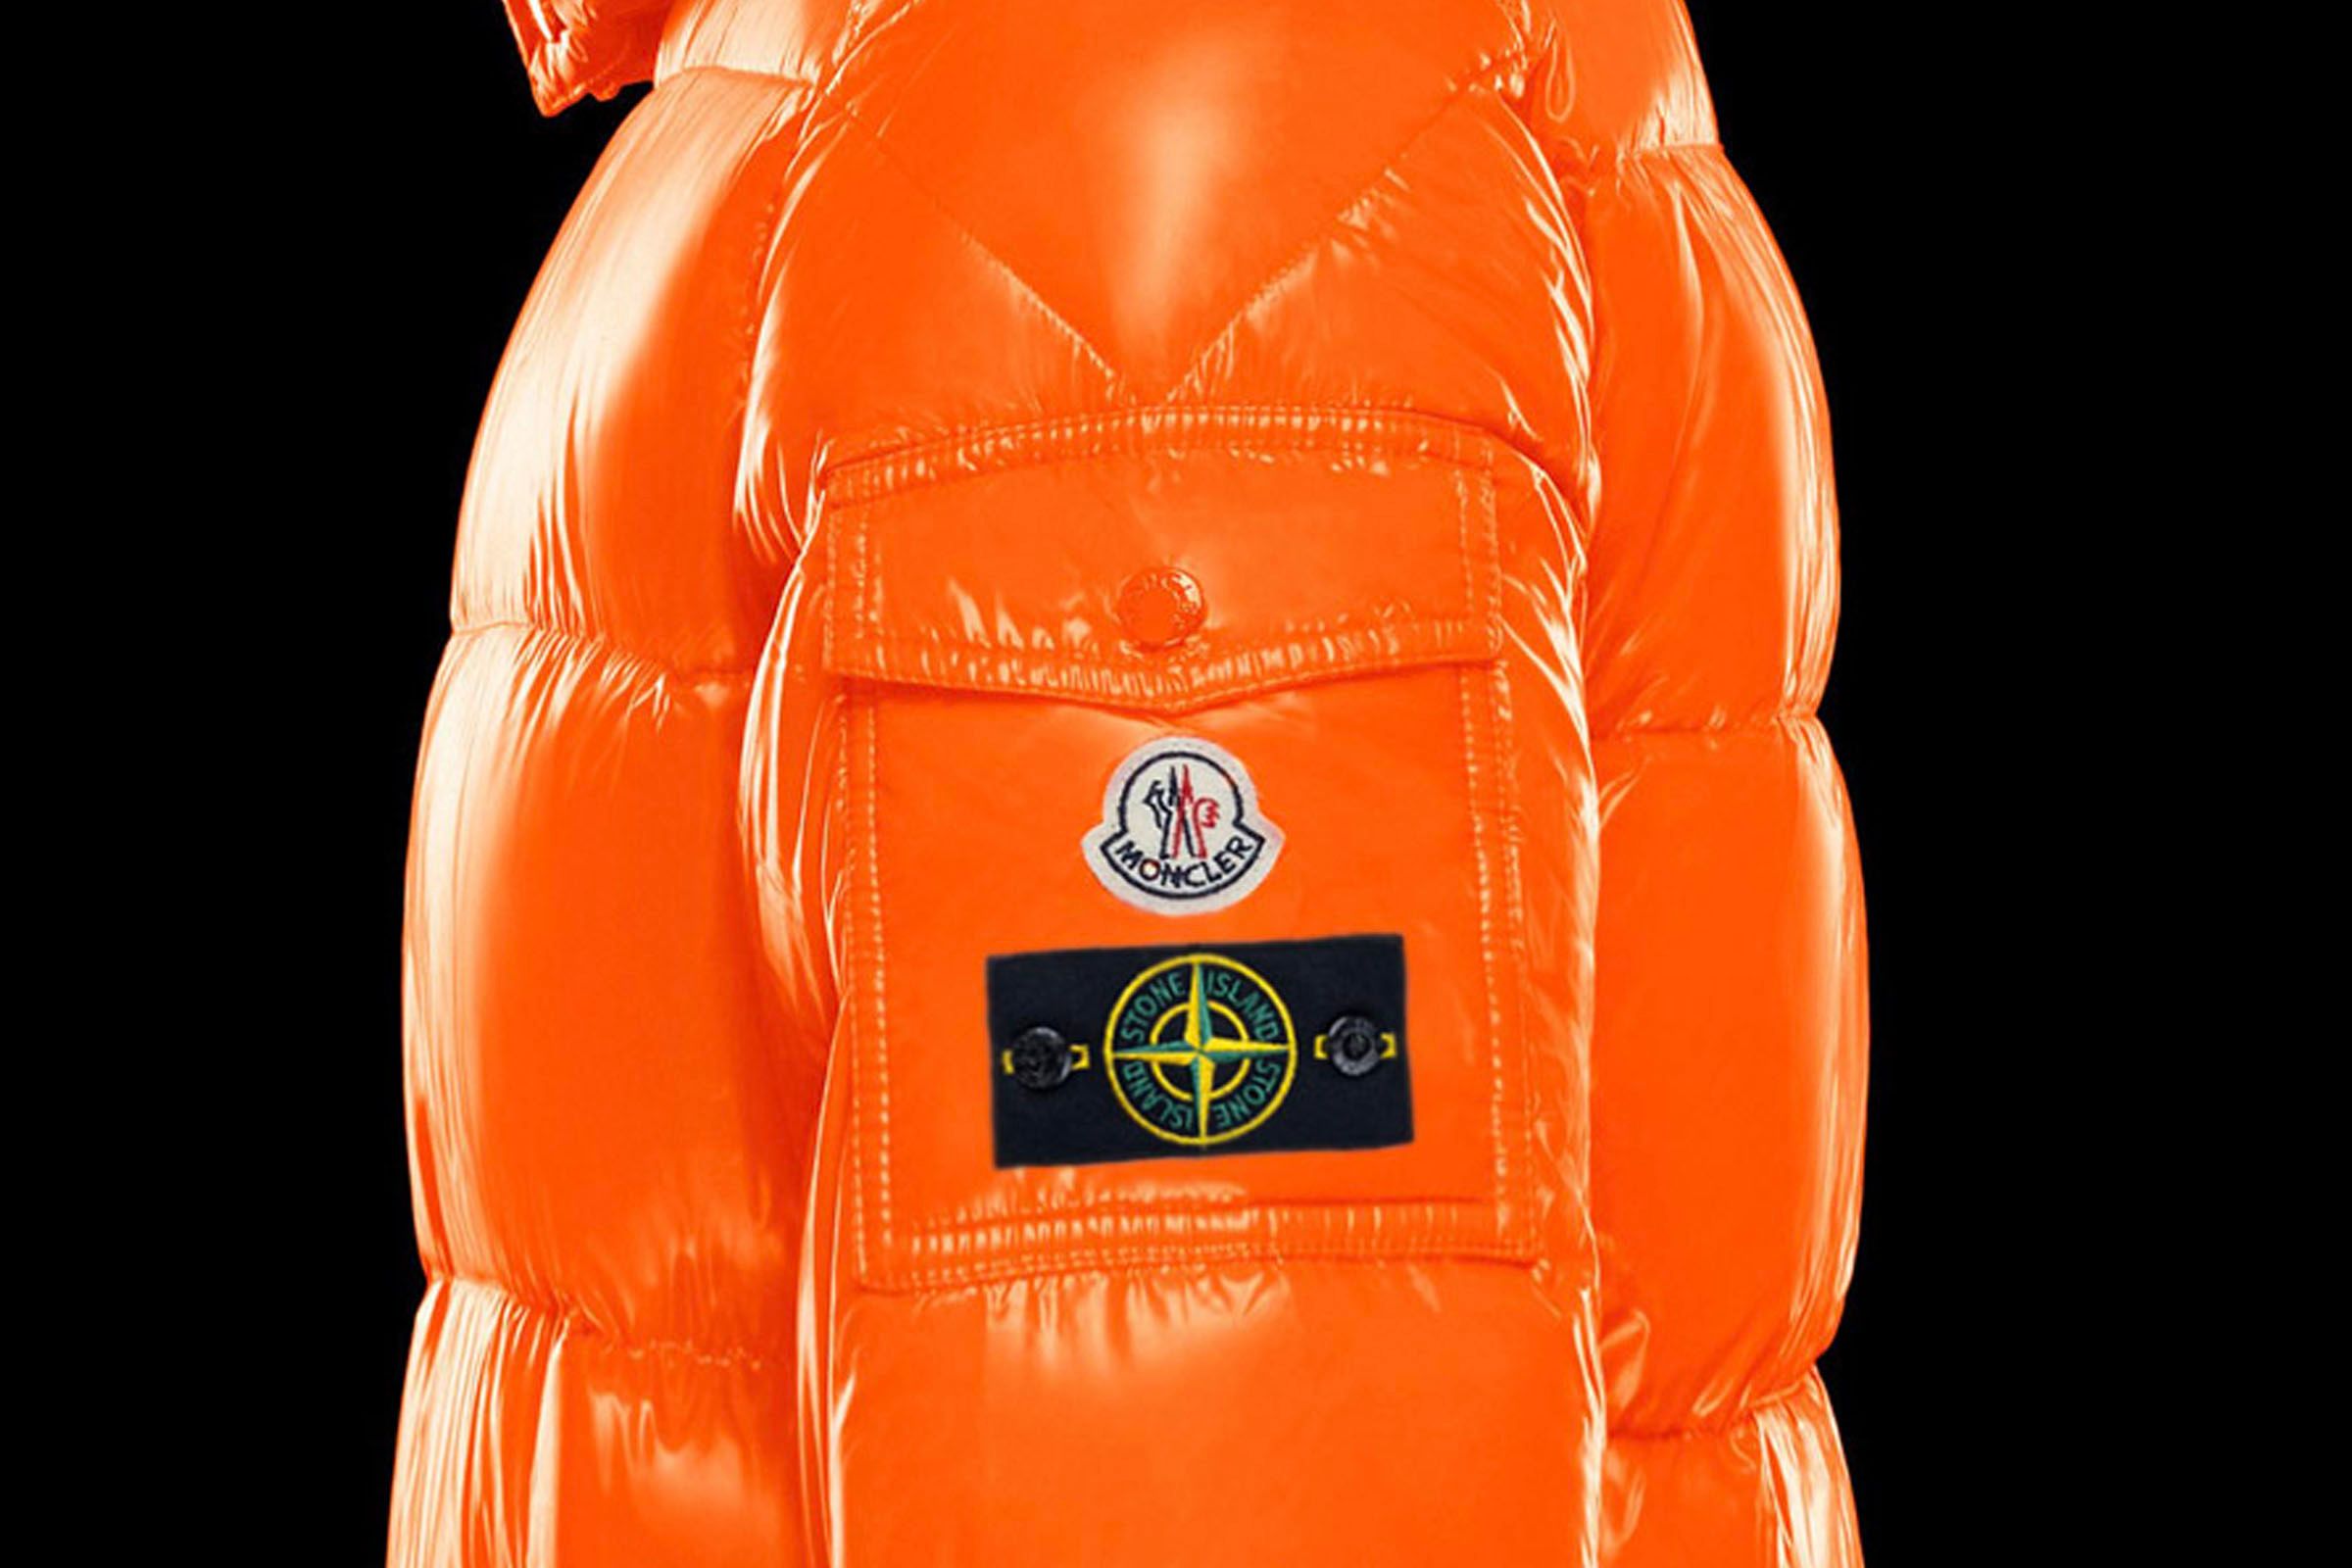 Moncler has acquired Stone Island for 1,16 billion euros